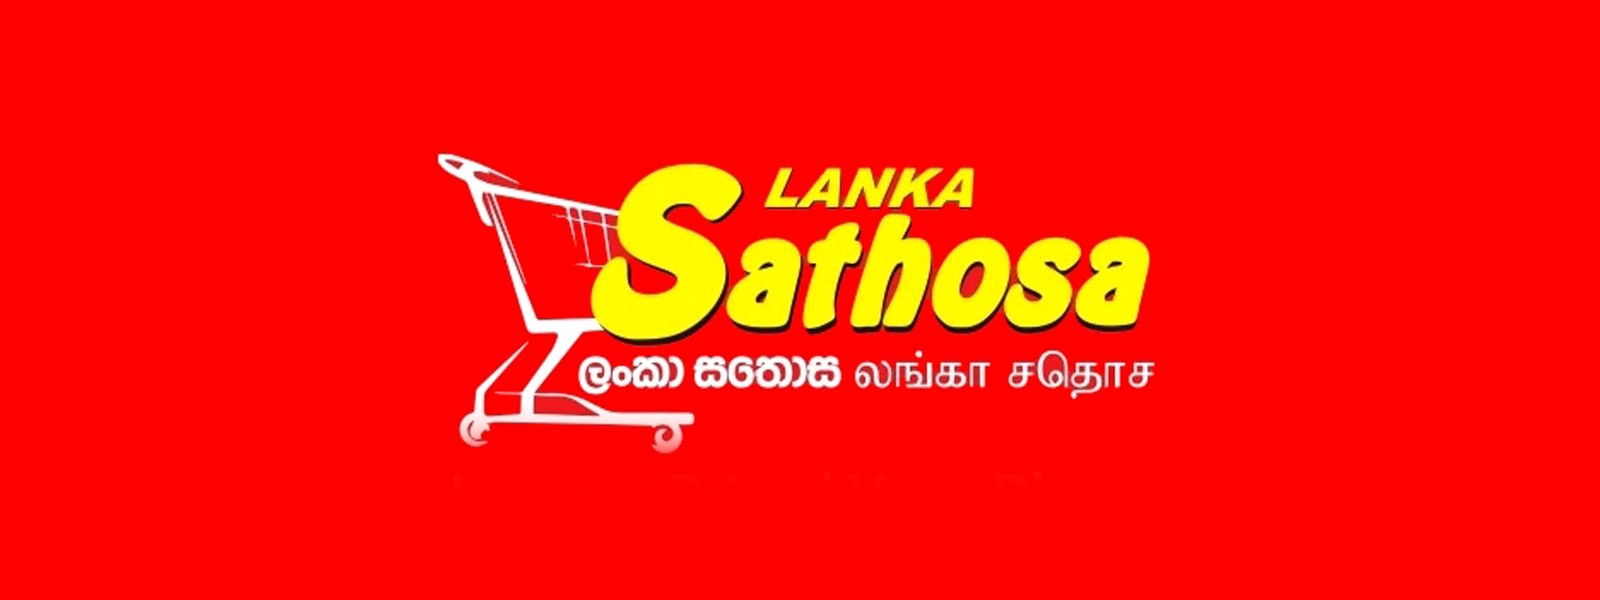 Sathosa reduces prices of 10 products